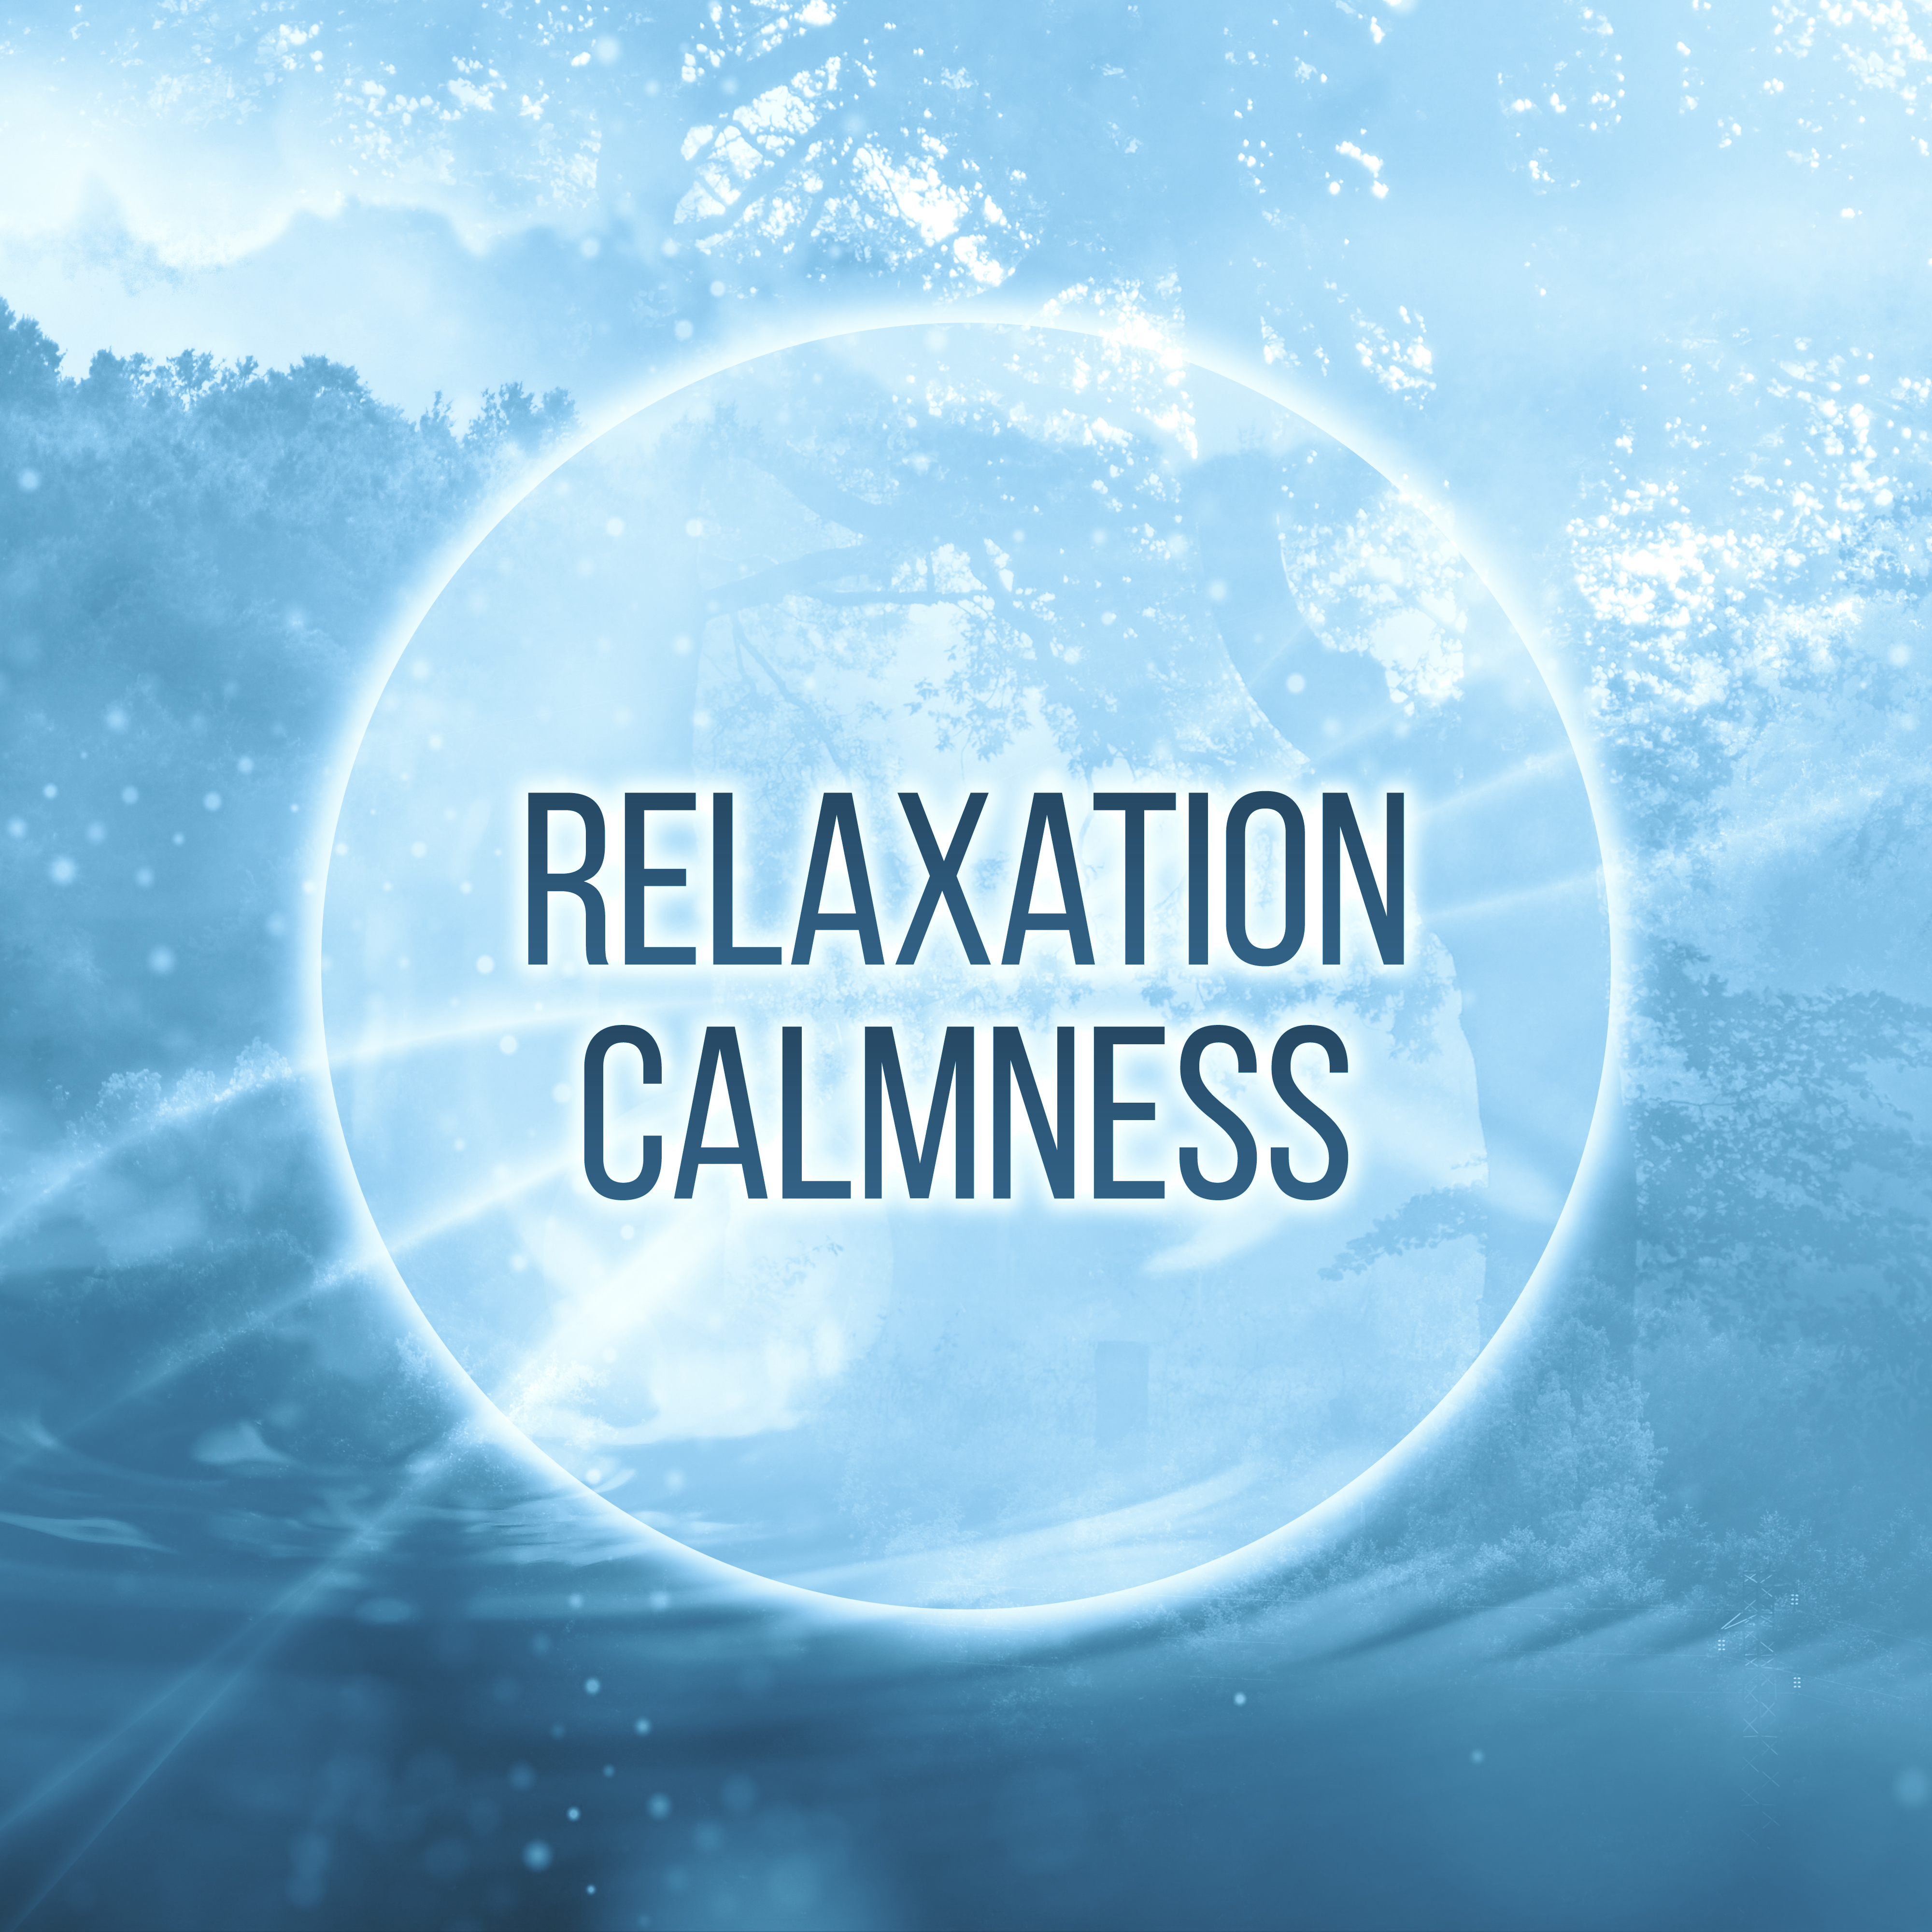 Relaxation Calmness – Soft Music to Relax, New Age Sounds, Self Relaxation, Rest a Bit